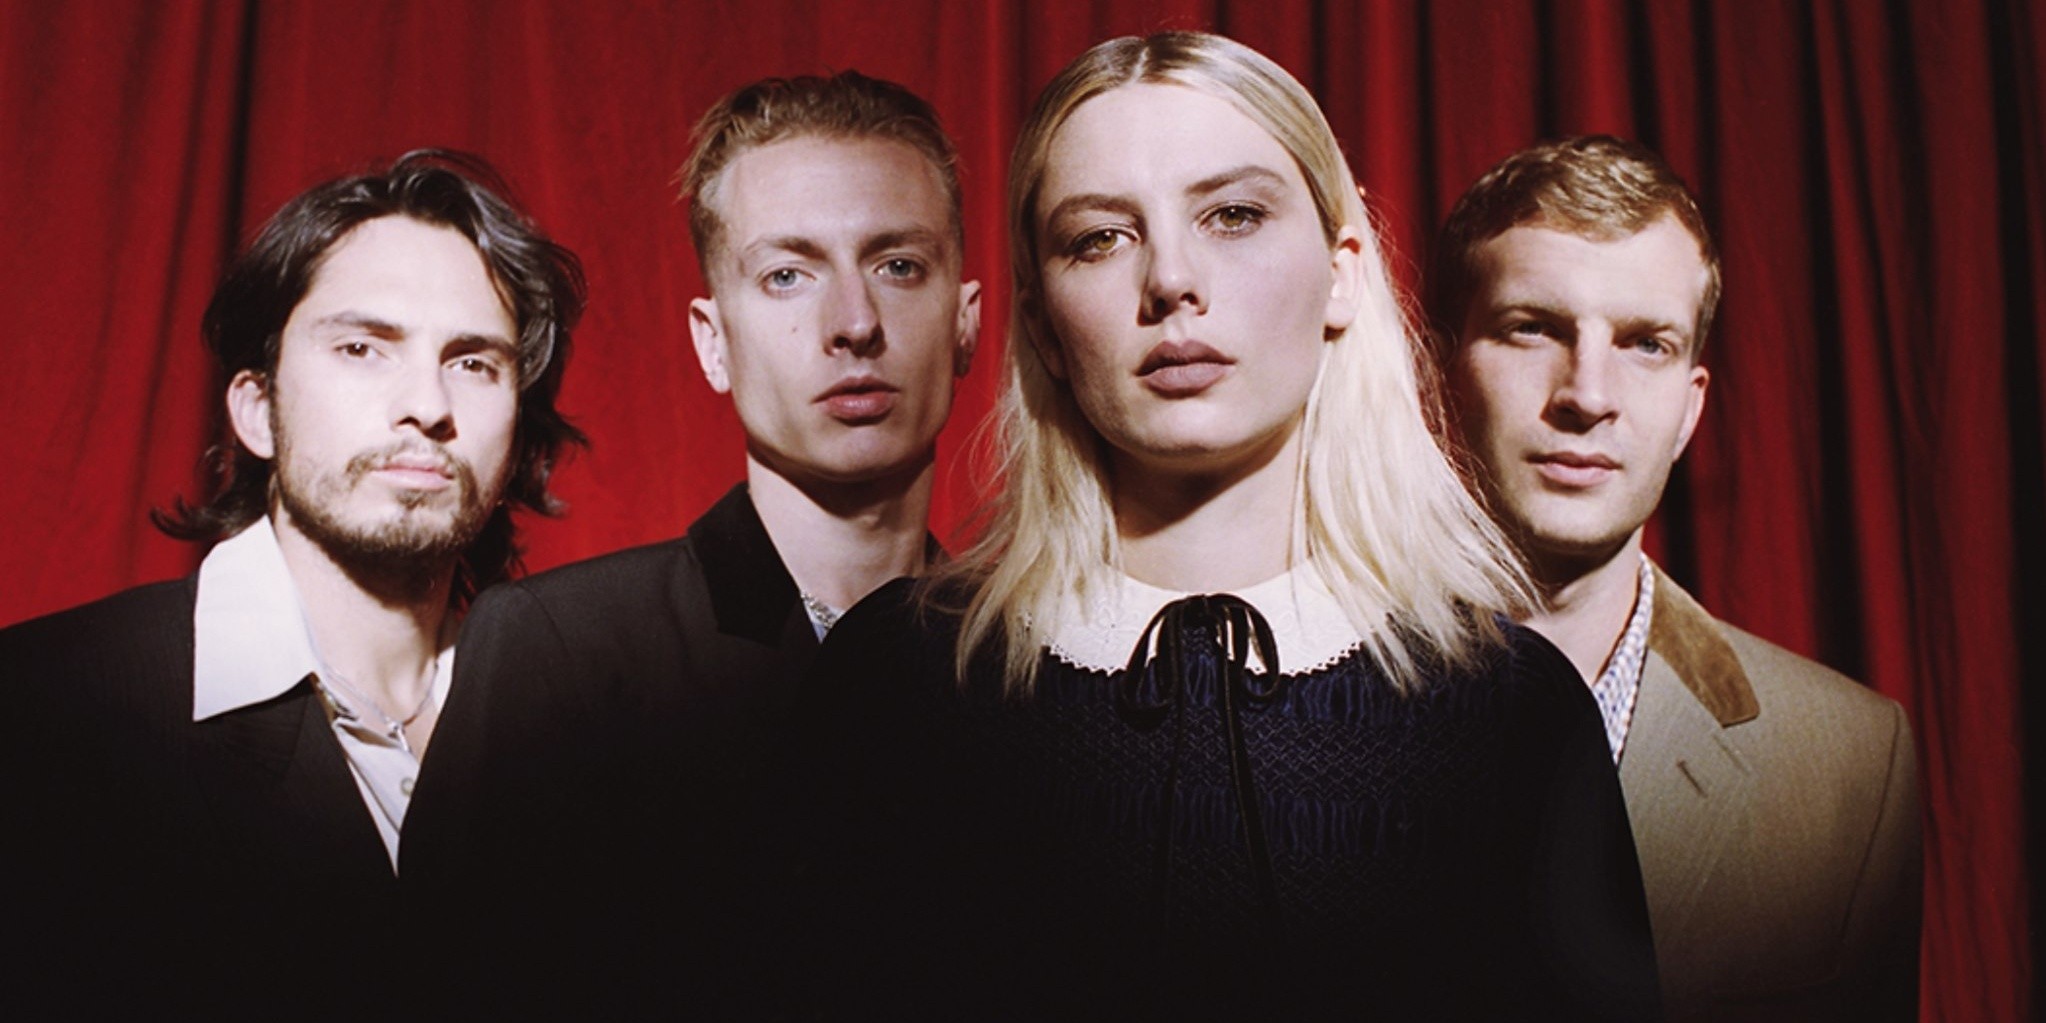 Wolf Alice on their new album ‘Blue Weekend’, creating a short film, and their ethos of “chasing a feeling”